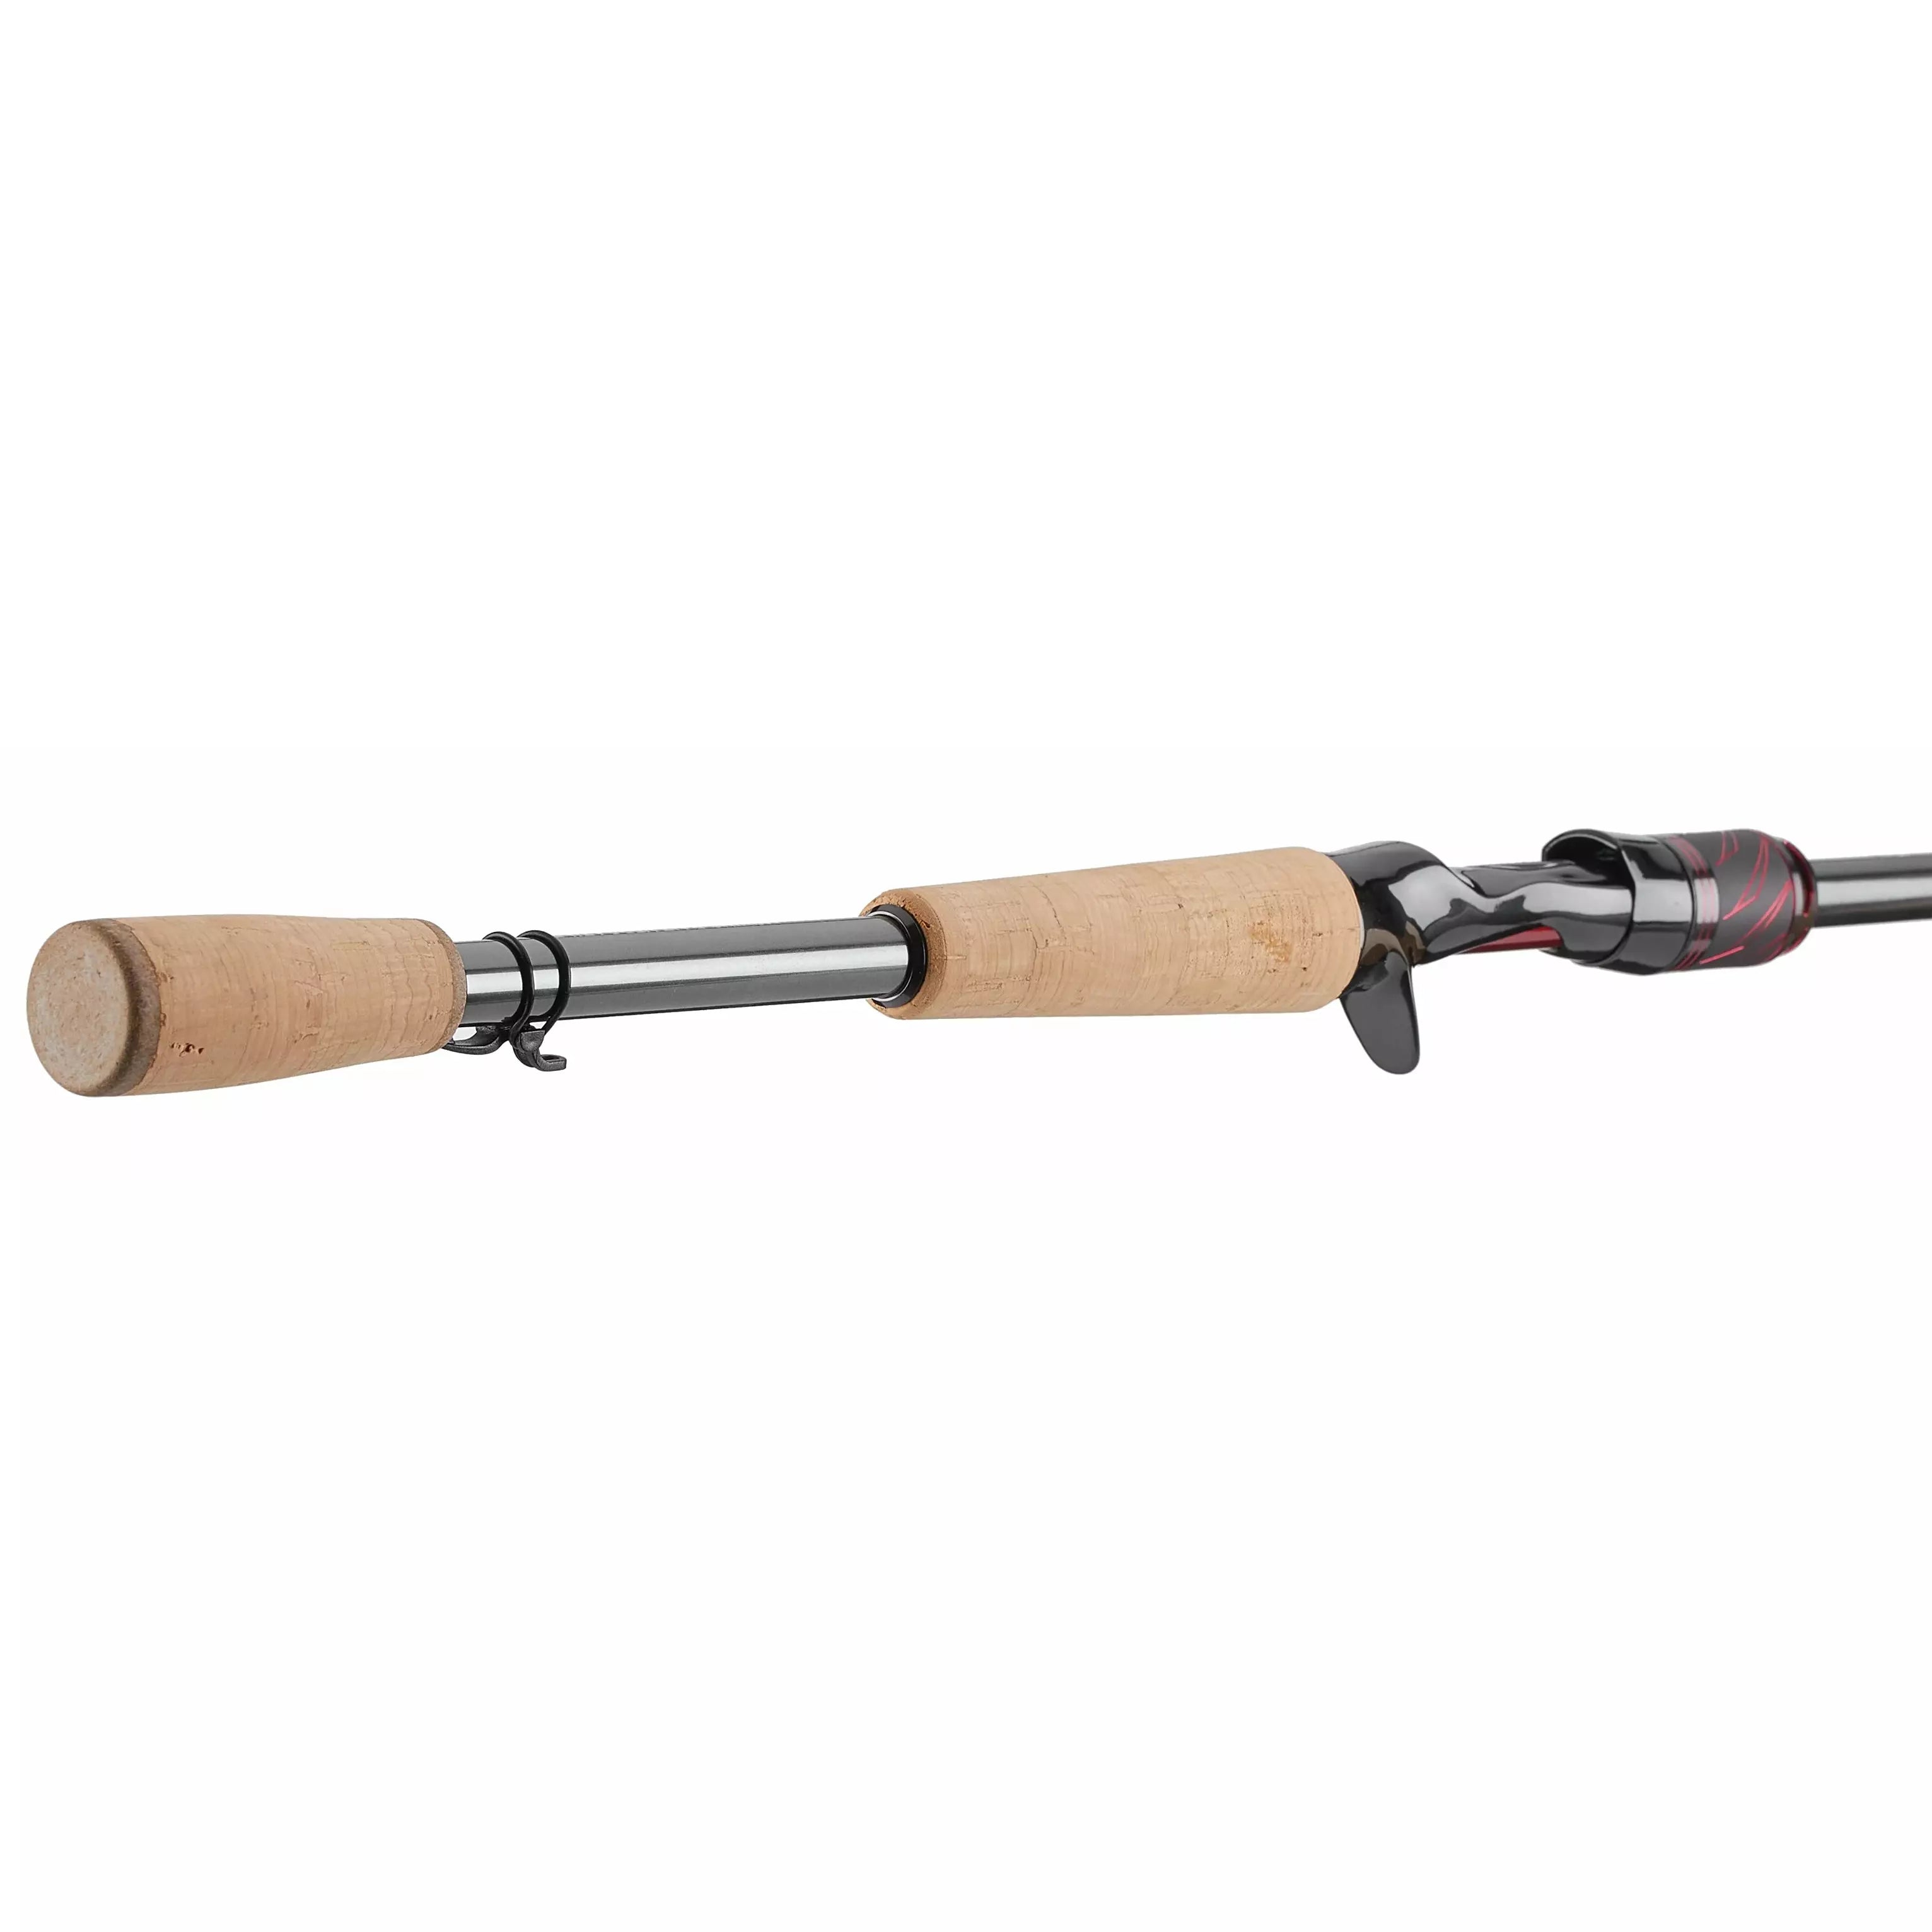 2021 New Daiwa Steez Rods - Fishing Rods, Reels, Line, and Knots